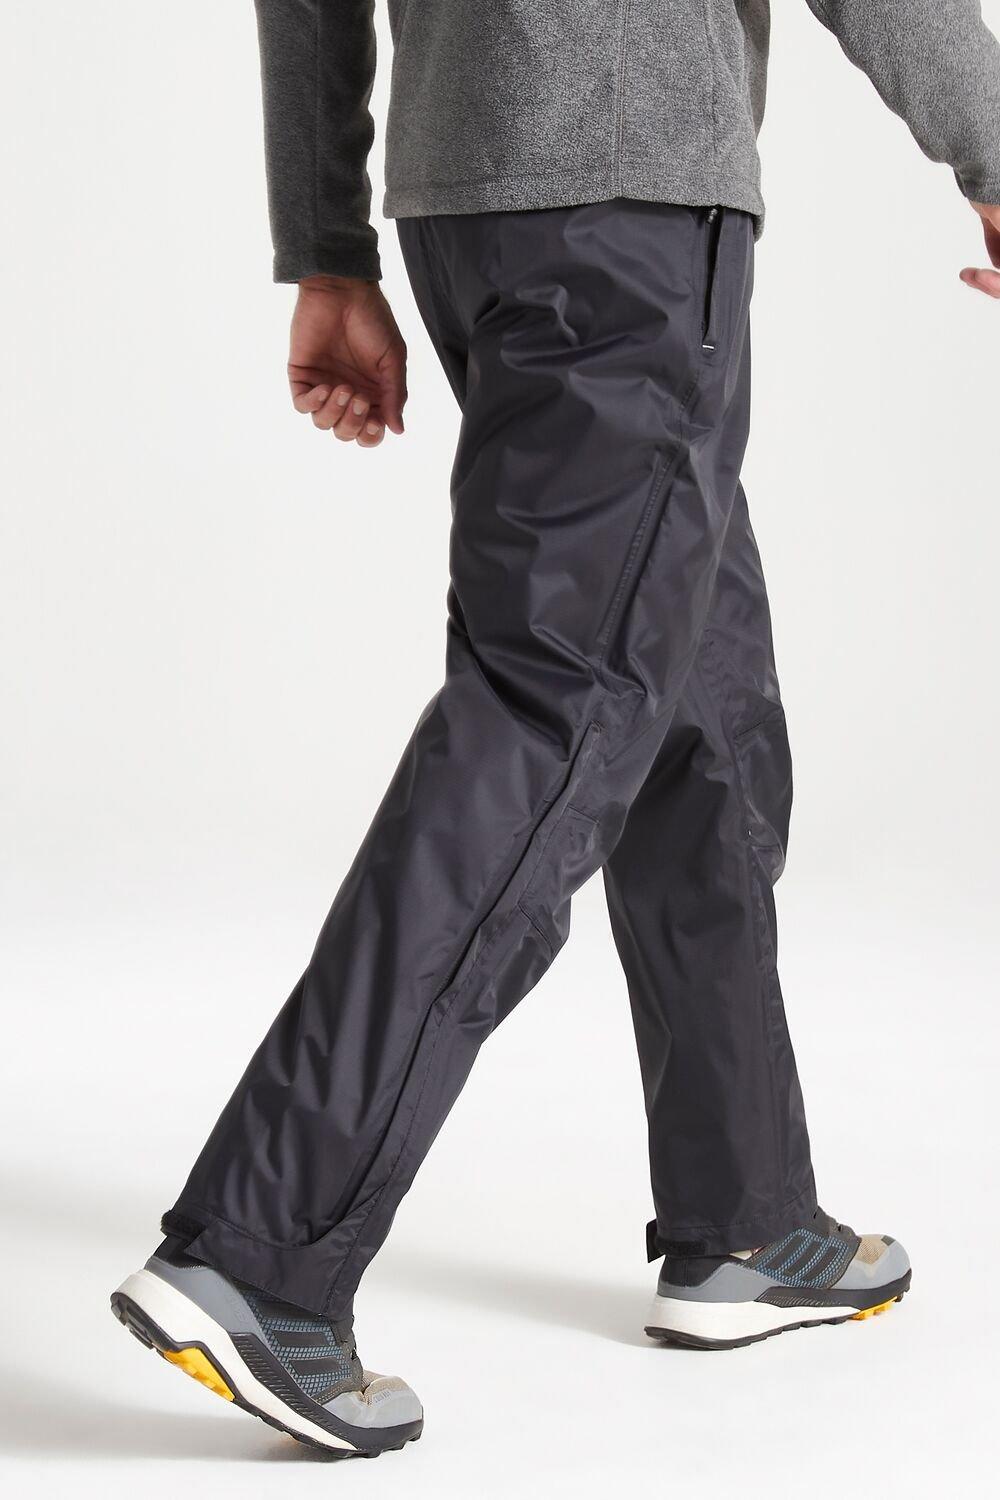 AquaDry 'Ascent' Waterproof Hiking Overtrousers